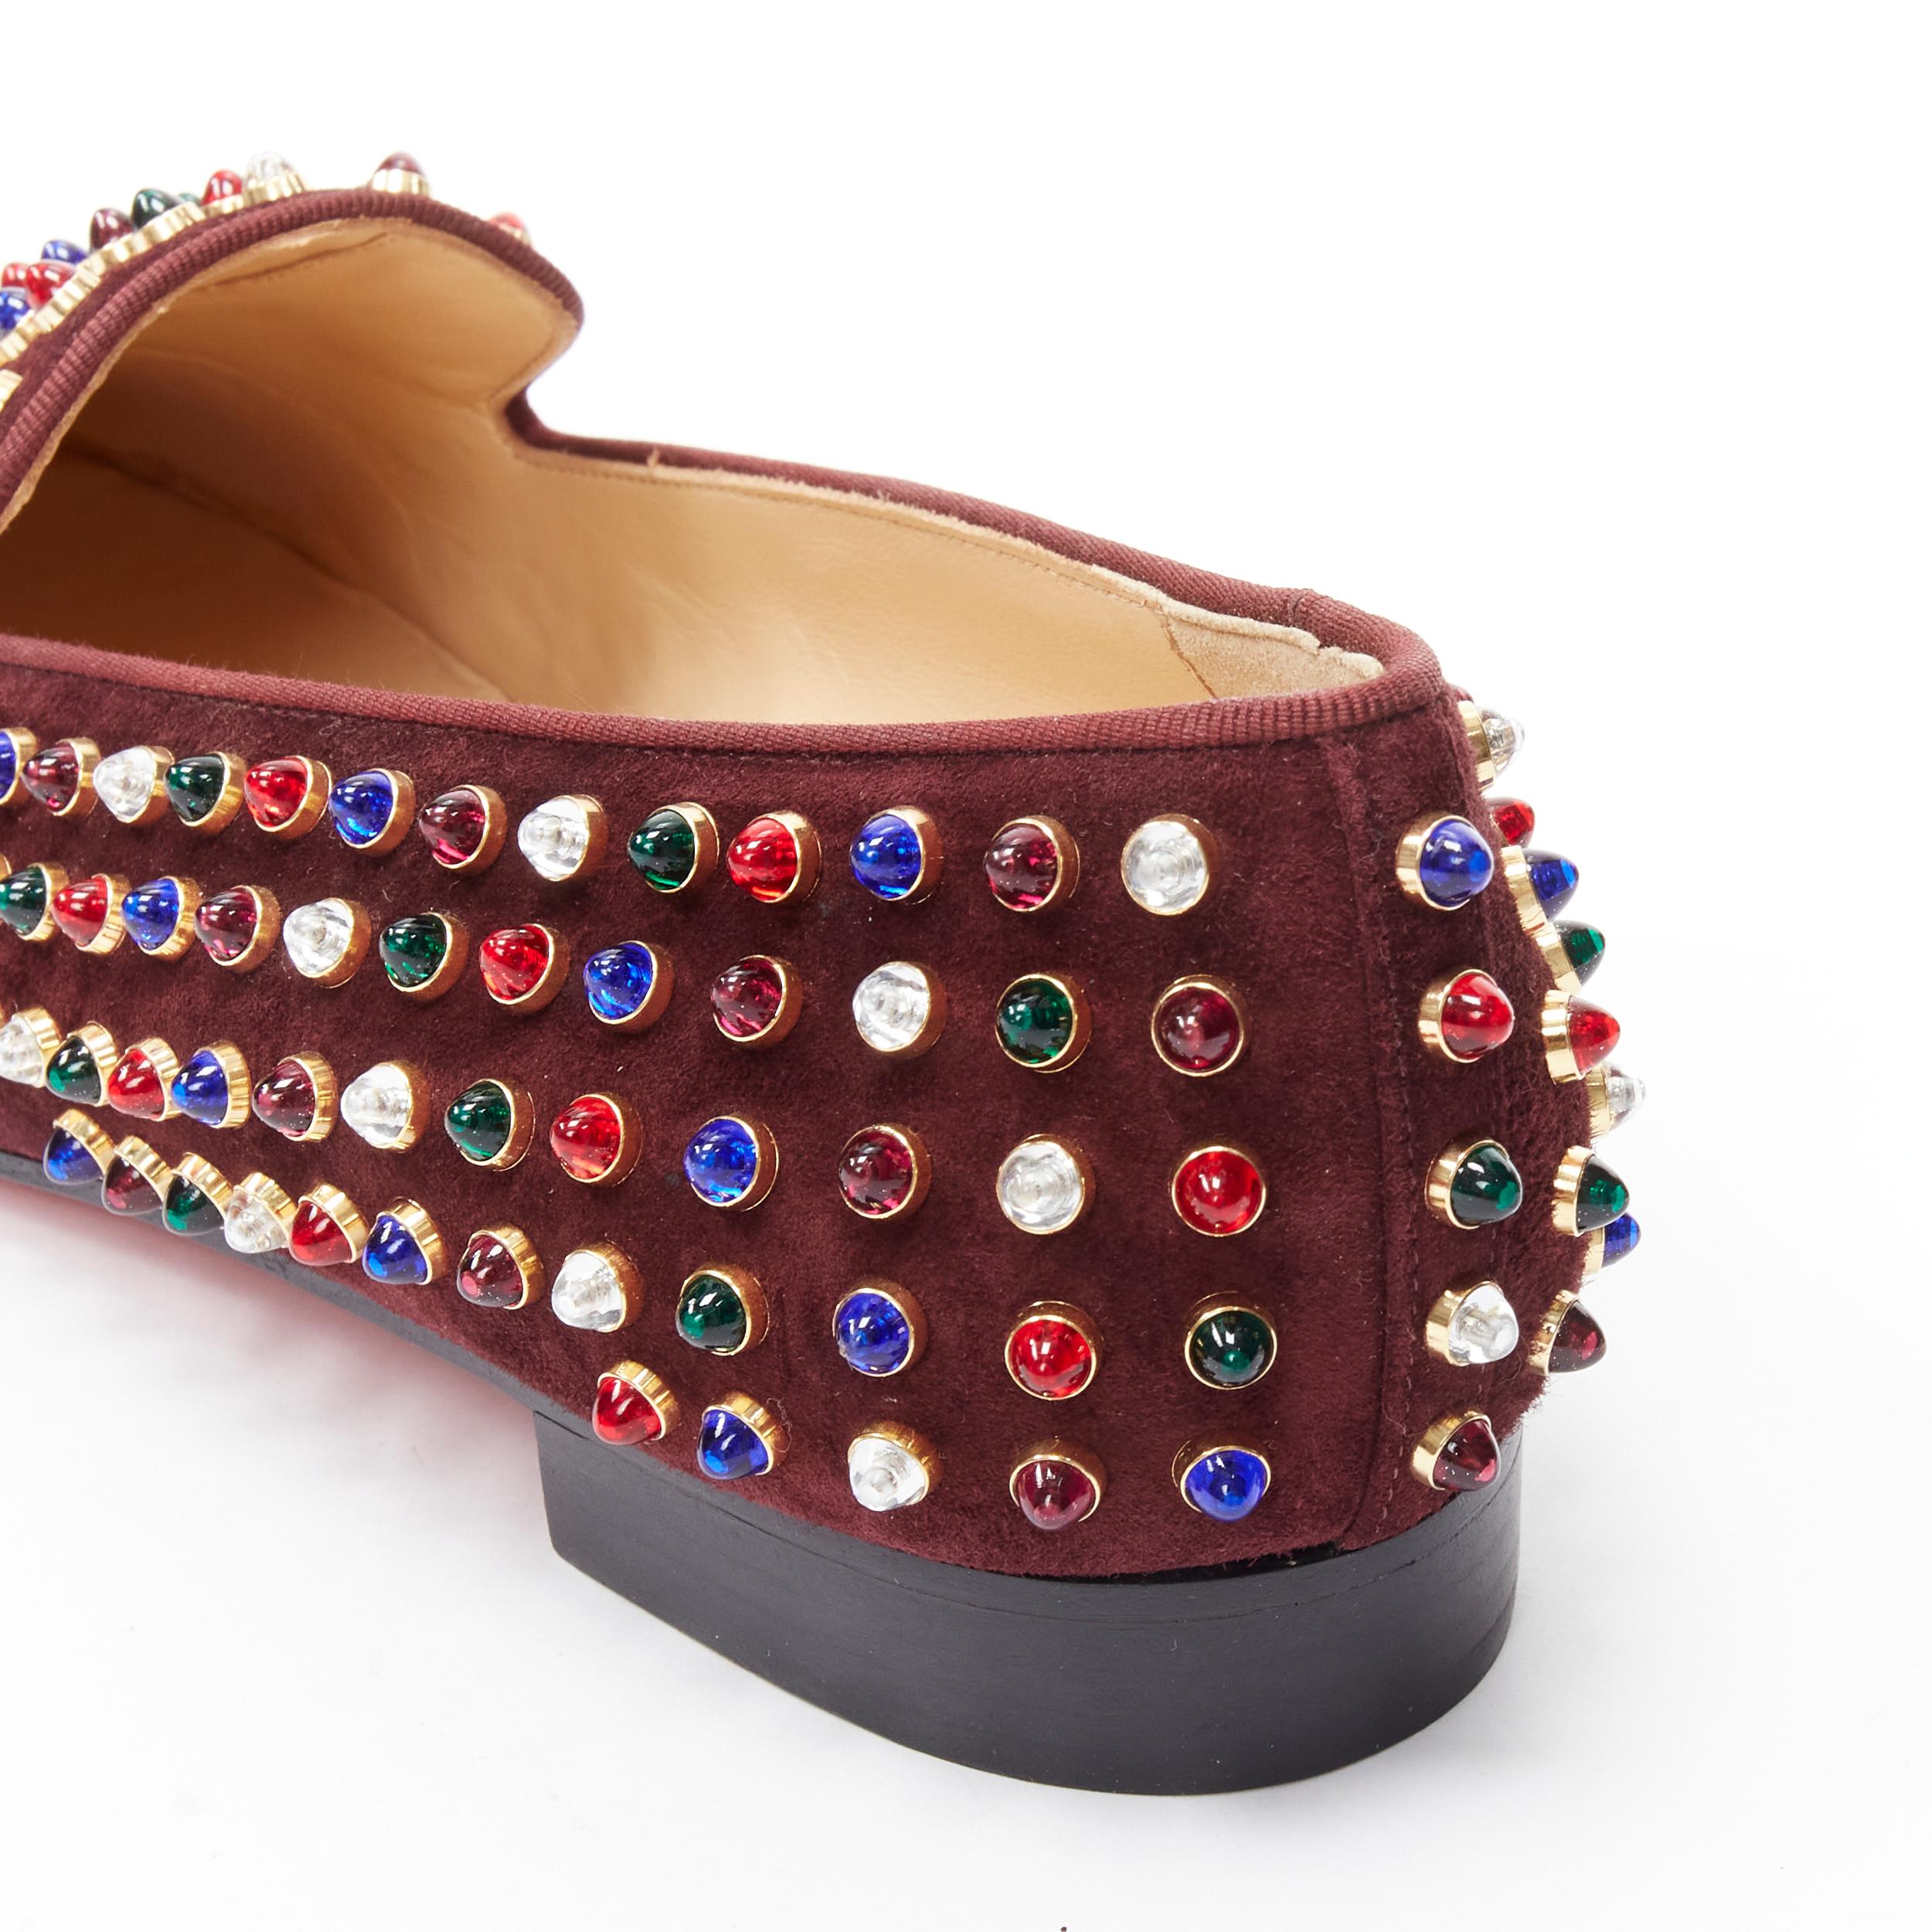 Women's new CHRISTIAN LOUBOUTIN Jewel tone Gripoix stud burgundy red suede loafer EU39.5 For Sale